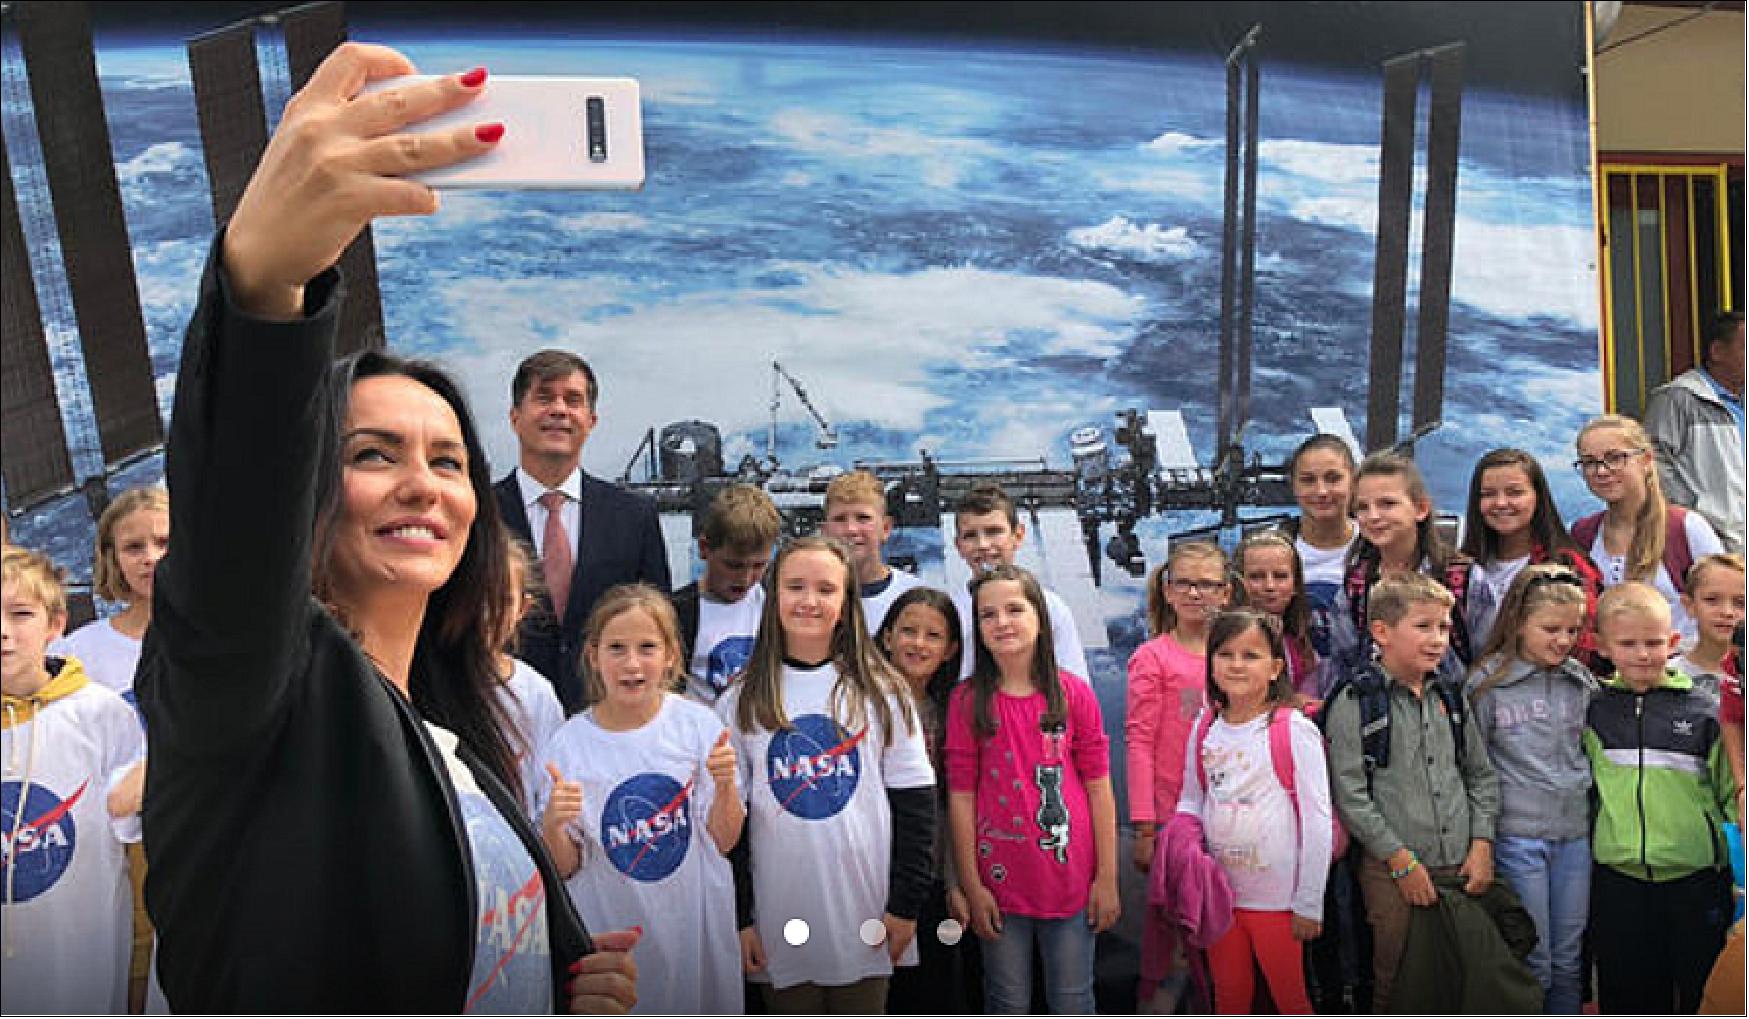 Figure 12: On Sept. 23, 2019, Eric Nelson, the U.S. Ambassador to Bosnia and Herzegovina, presented a framed letter to the Snezana Ruzucic, mayor of the Balkan municipality of Jezero. The letter, from NASA's director of Mars Exploration, James Watzin, honored the connection between the small Balkan town and Jezero Crater the landing site of NASA's upcoming Mars 2020 mission. In this picture, Ruzucic snaps a selfie of the ambassador with local school children (image credit: US Embassy Sarajevo)